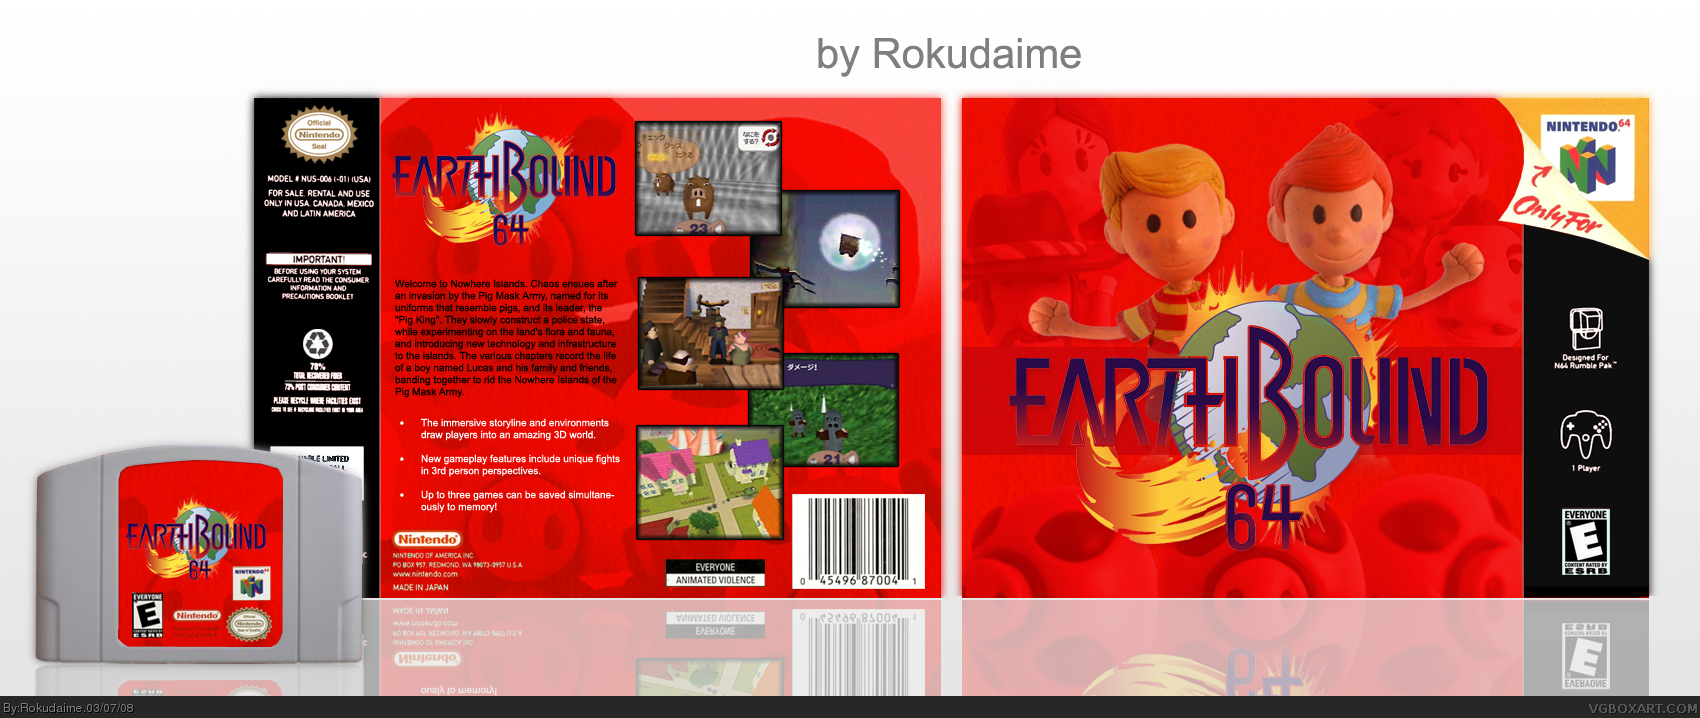 Earthbound 64 box cover